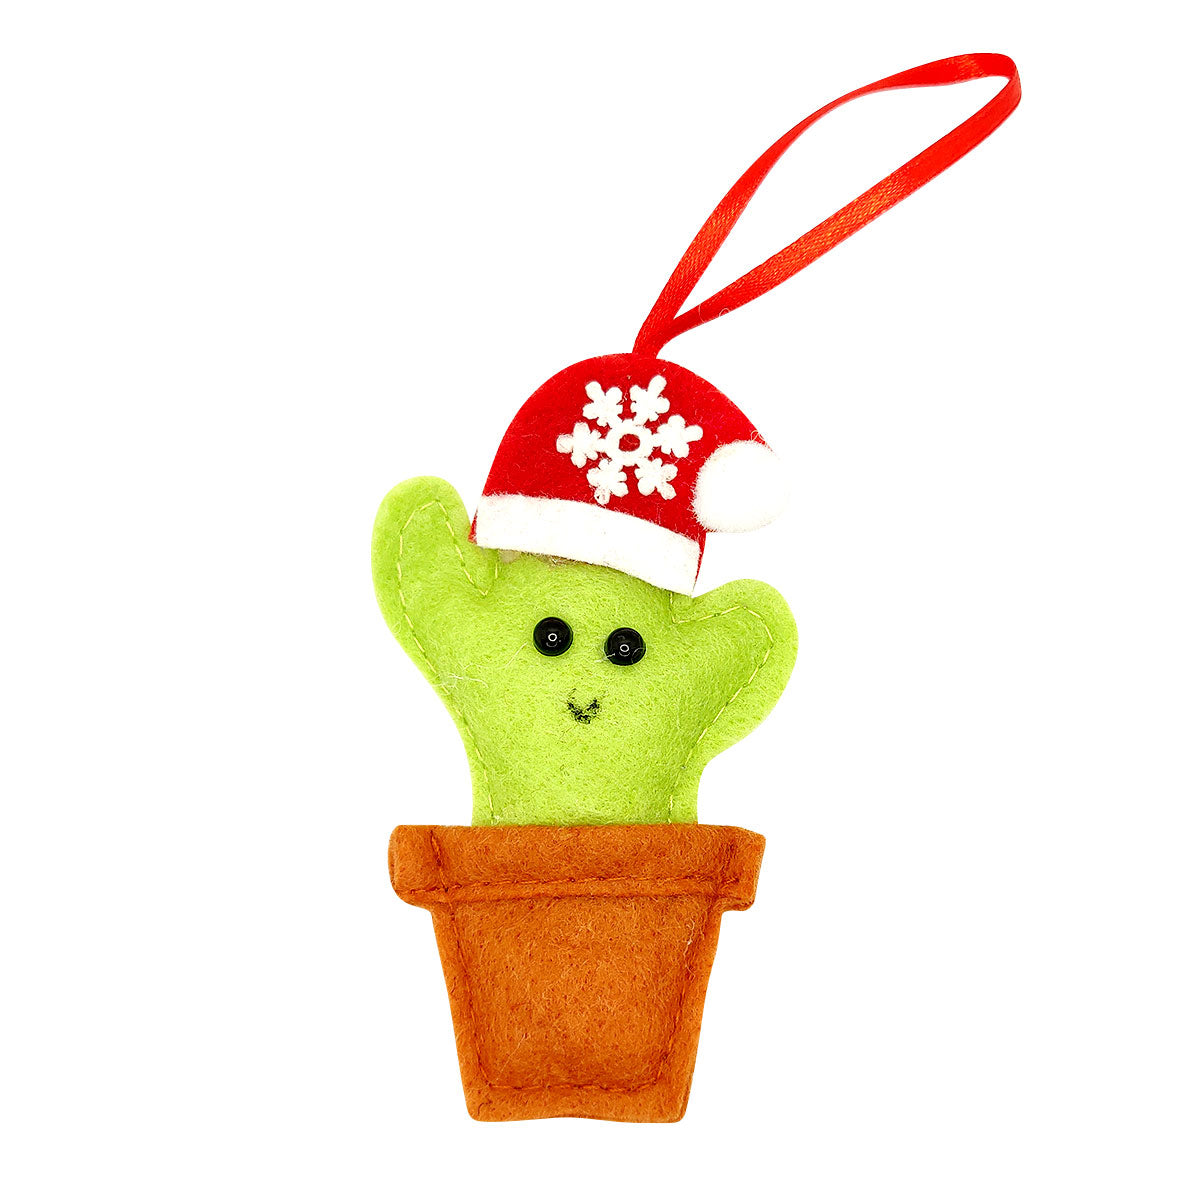 Cactus Christmas Ornament for sale, Cactus Christmas Ornament in Green Felt Holiday Home Decor, Buy Small Cactus Stuffed Plant online